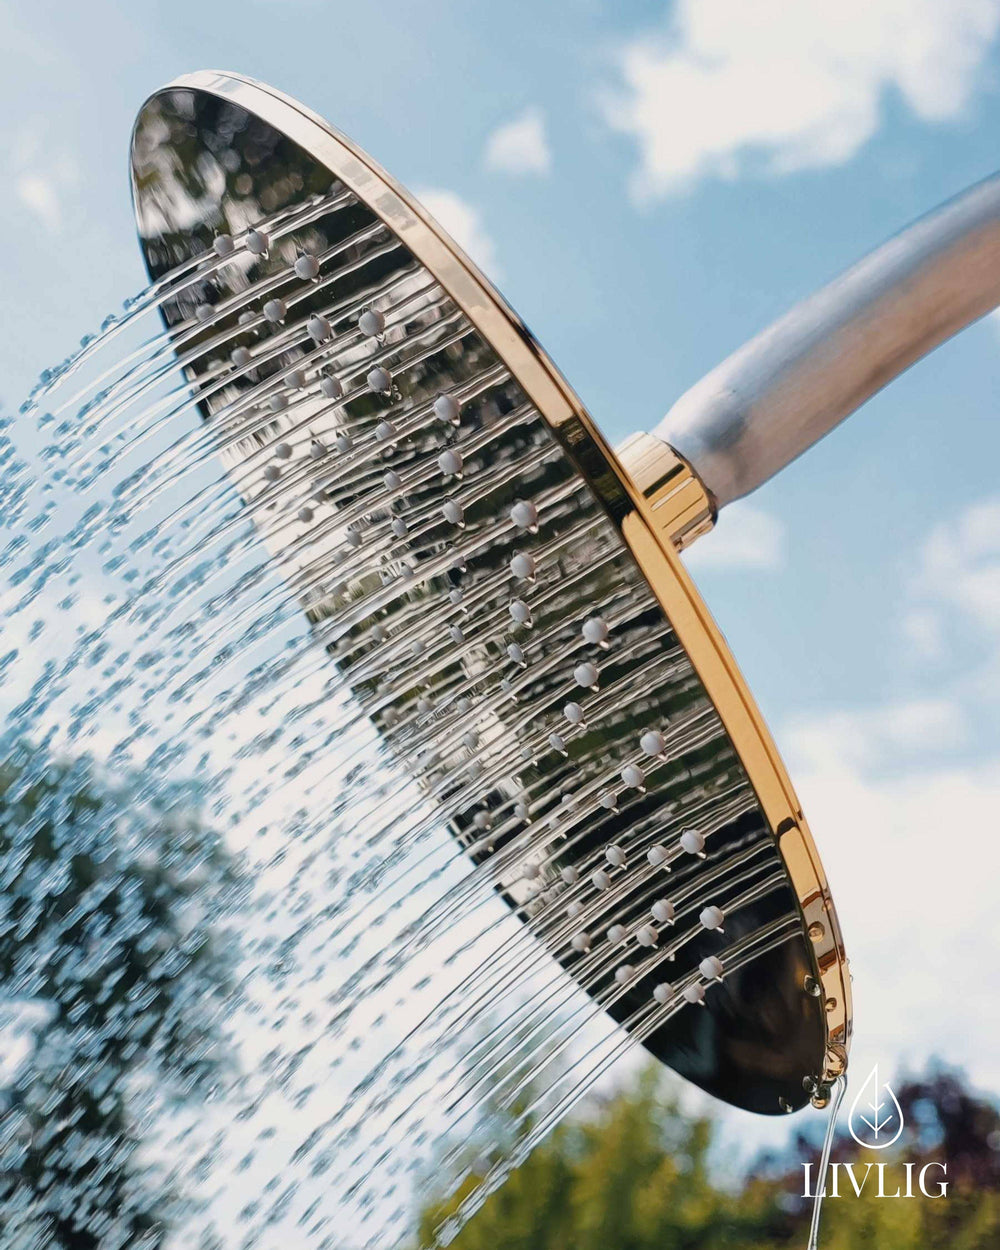 a close up of a shower head with trees in the background